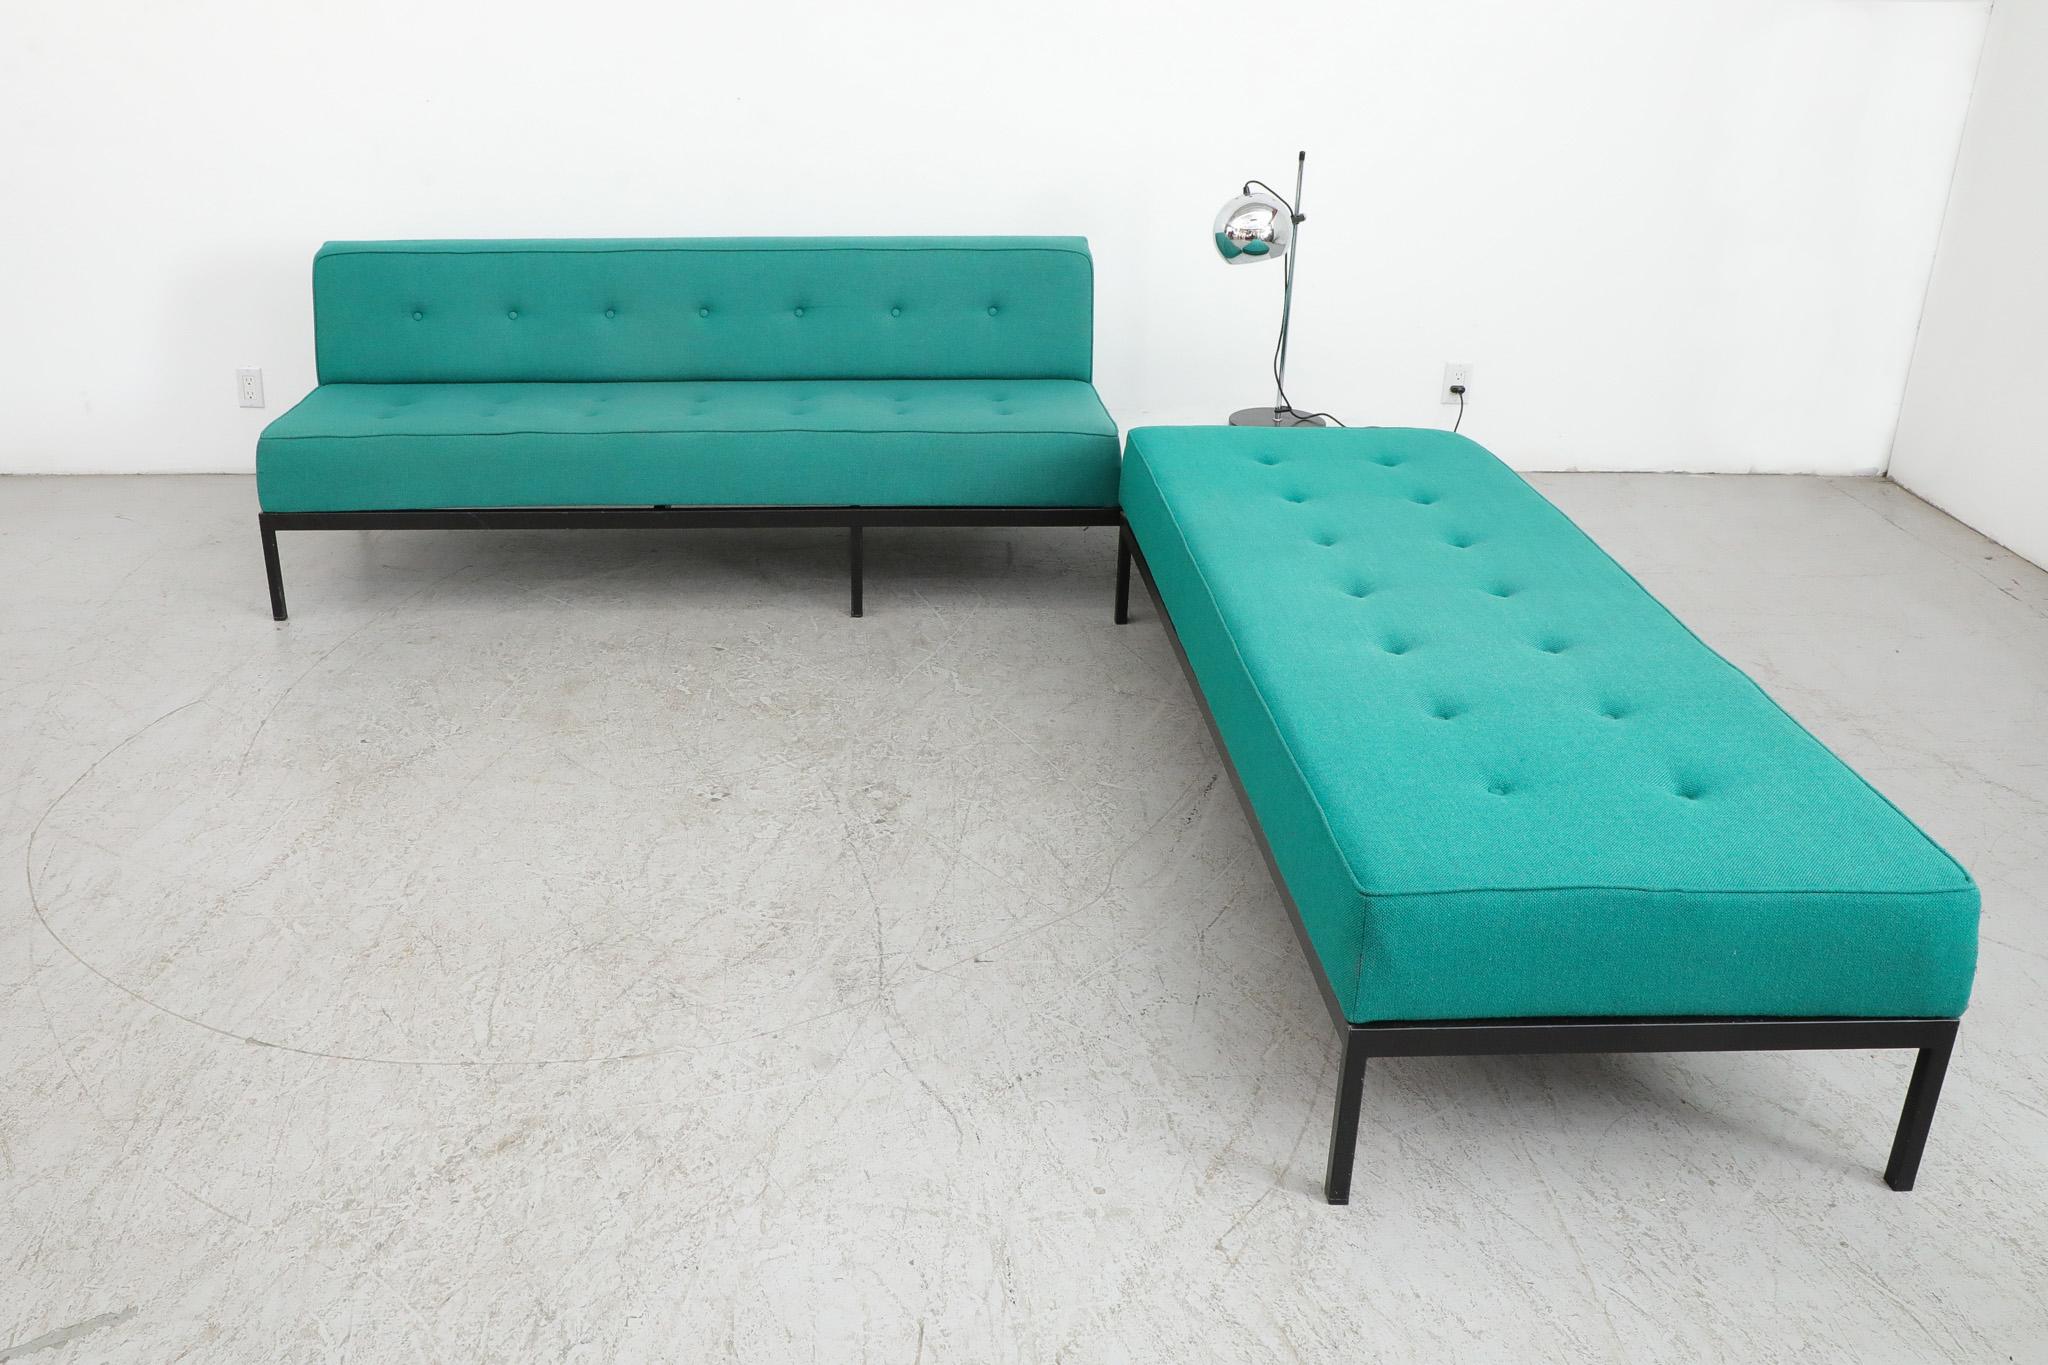 Awesome 'Model 070' corner sofa set with daybed by Kho Liang Ie for Artifort, 1960s. Kho Liang Ie was born in 1927 in Magelang, Dutch East Indies. After Indonesia's independence in 1949, the family moved to the Netherlands where, after completing